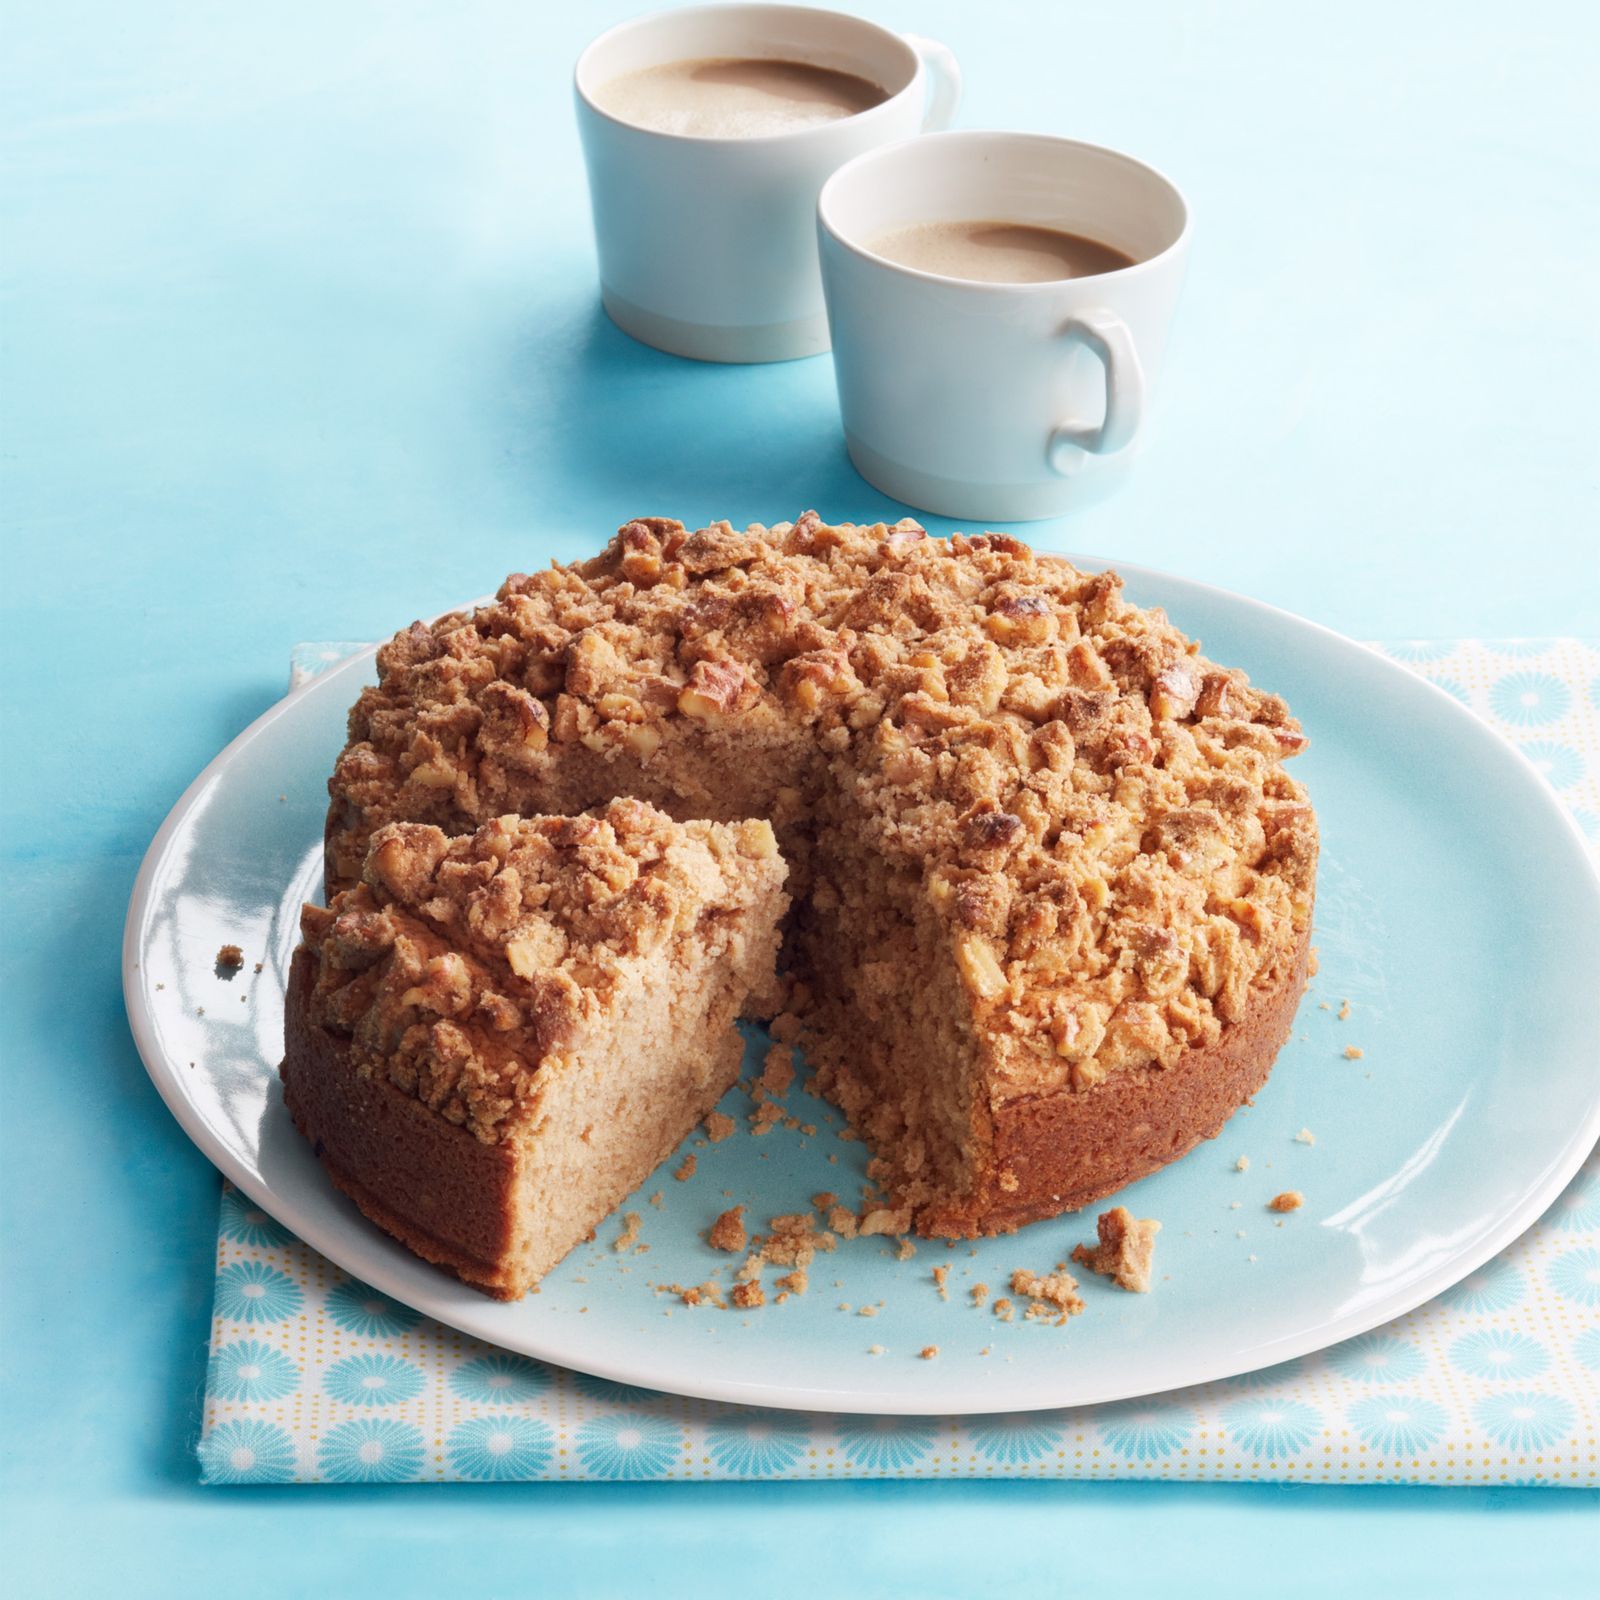 Calories in Crumb Coffee Cake from Entenmann's